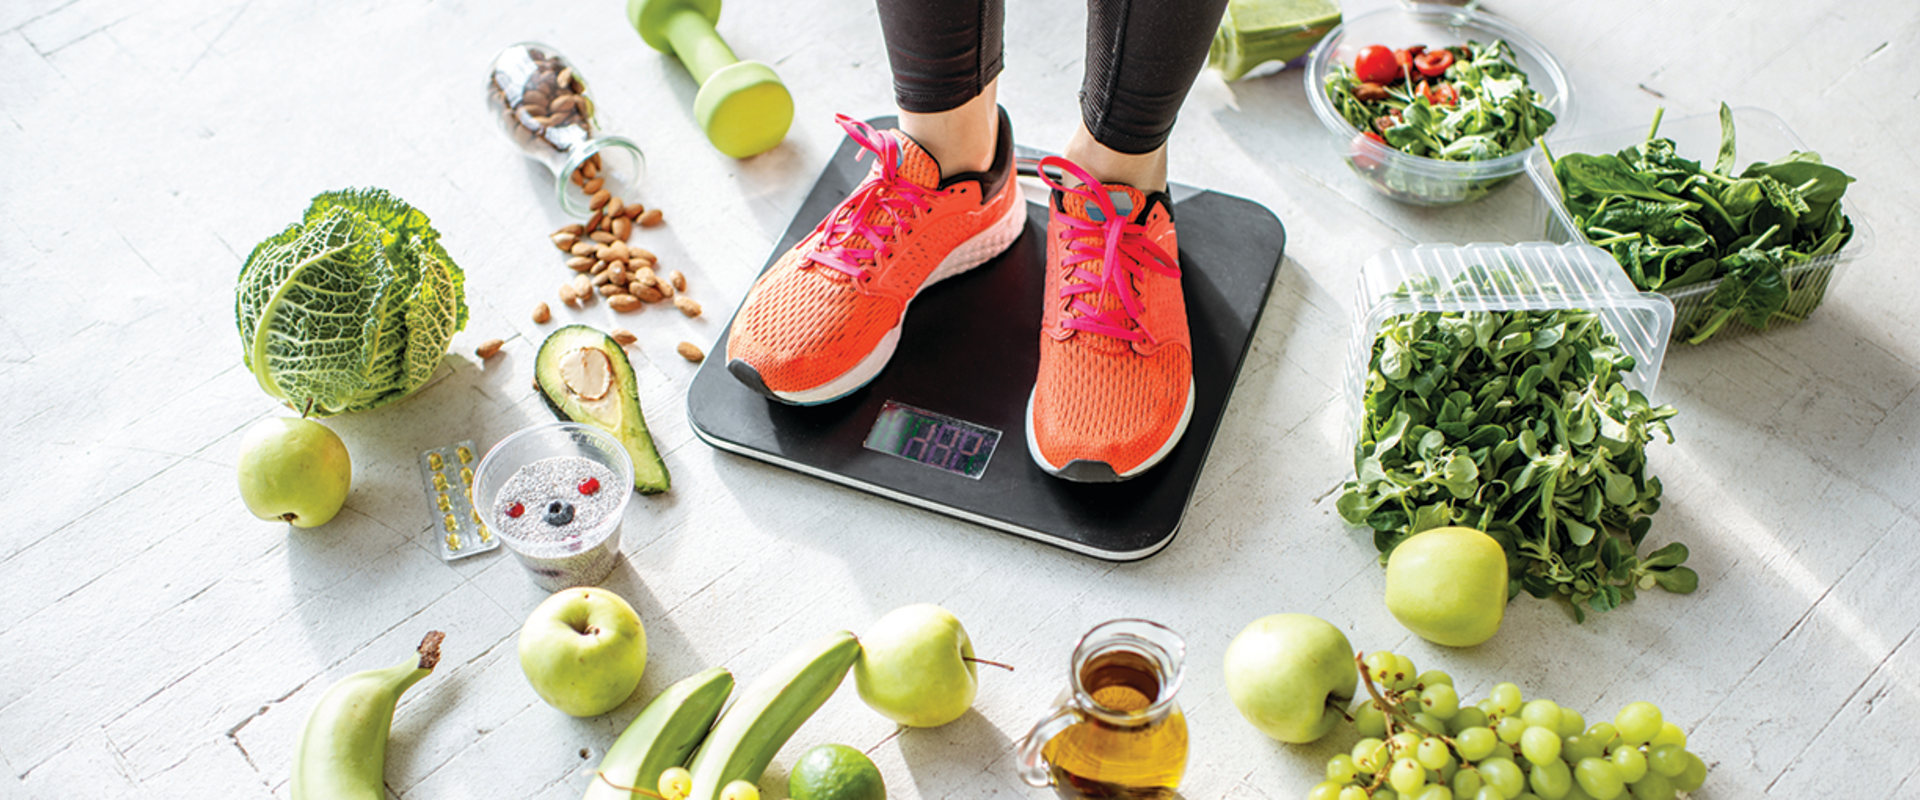 Are there any risks to a weight loss plan?